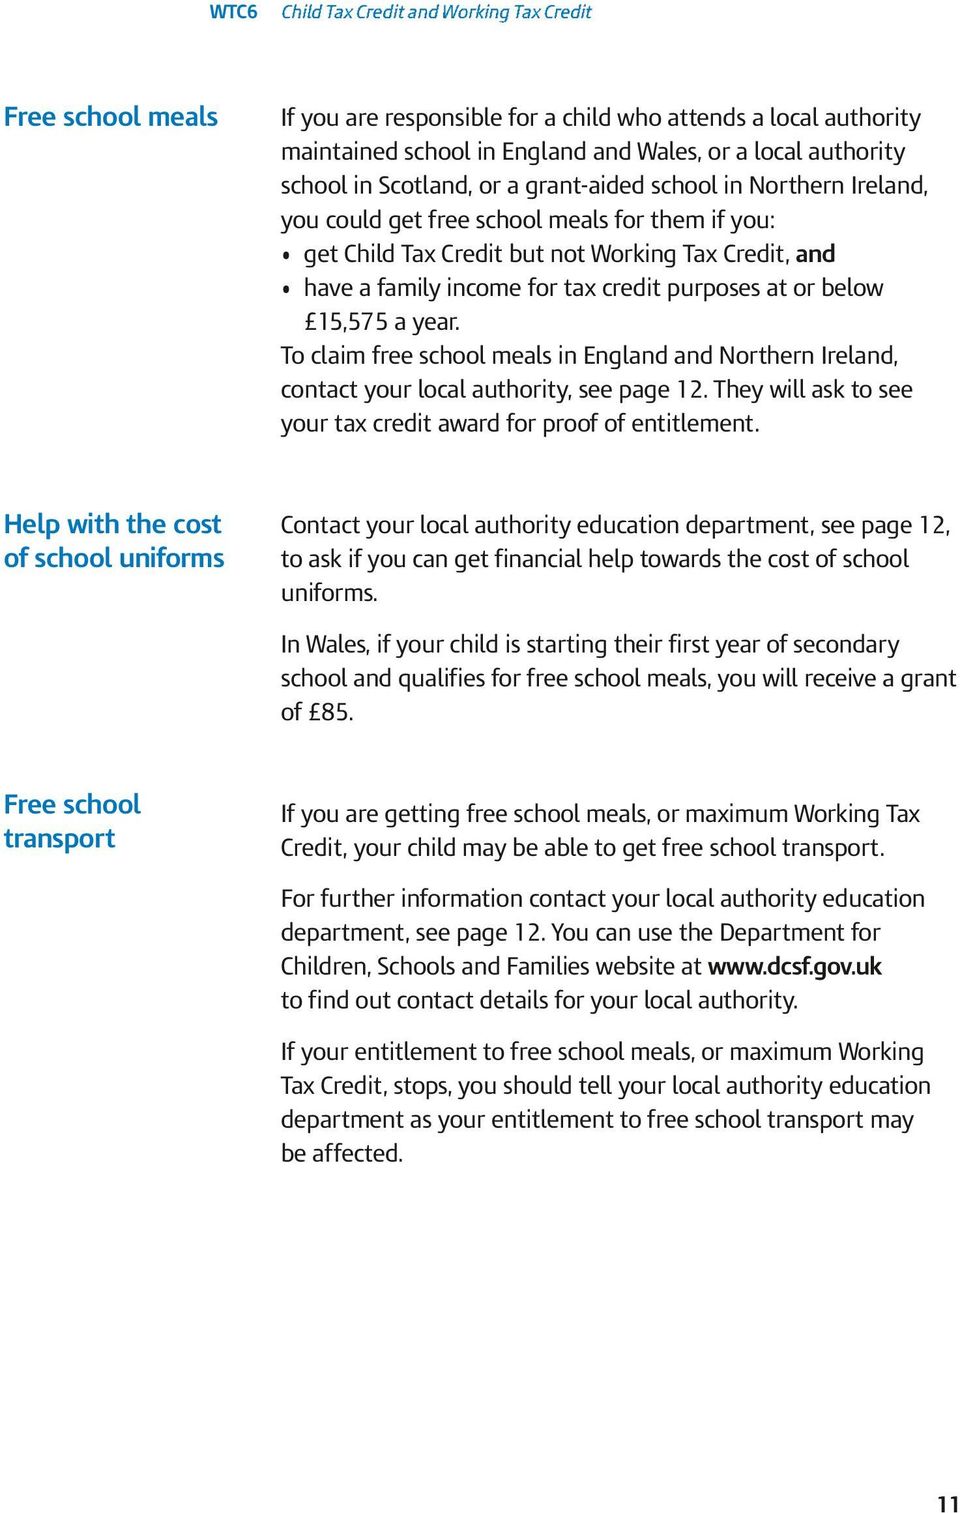 To claim free school meals in England and Northern Ireland, contact your local authority, see page 12. They will ask to see your tax credit award for proof of entitlement.